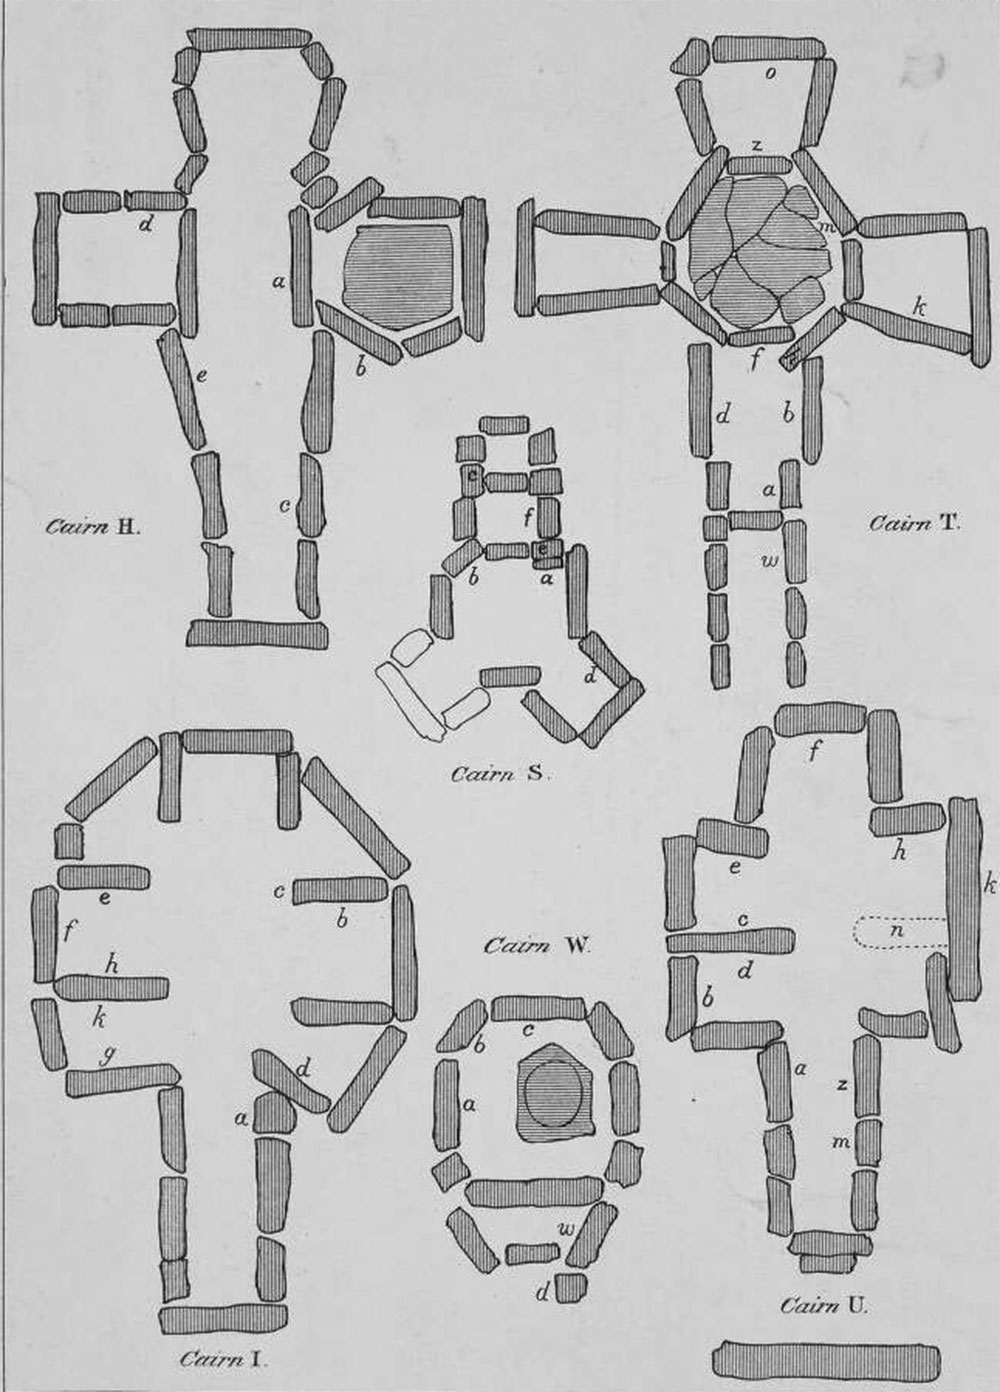 Plans of the chambers at Loughcrew from Eugene Conwell's report.